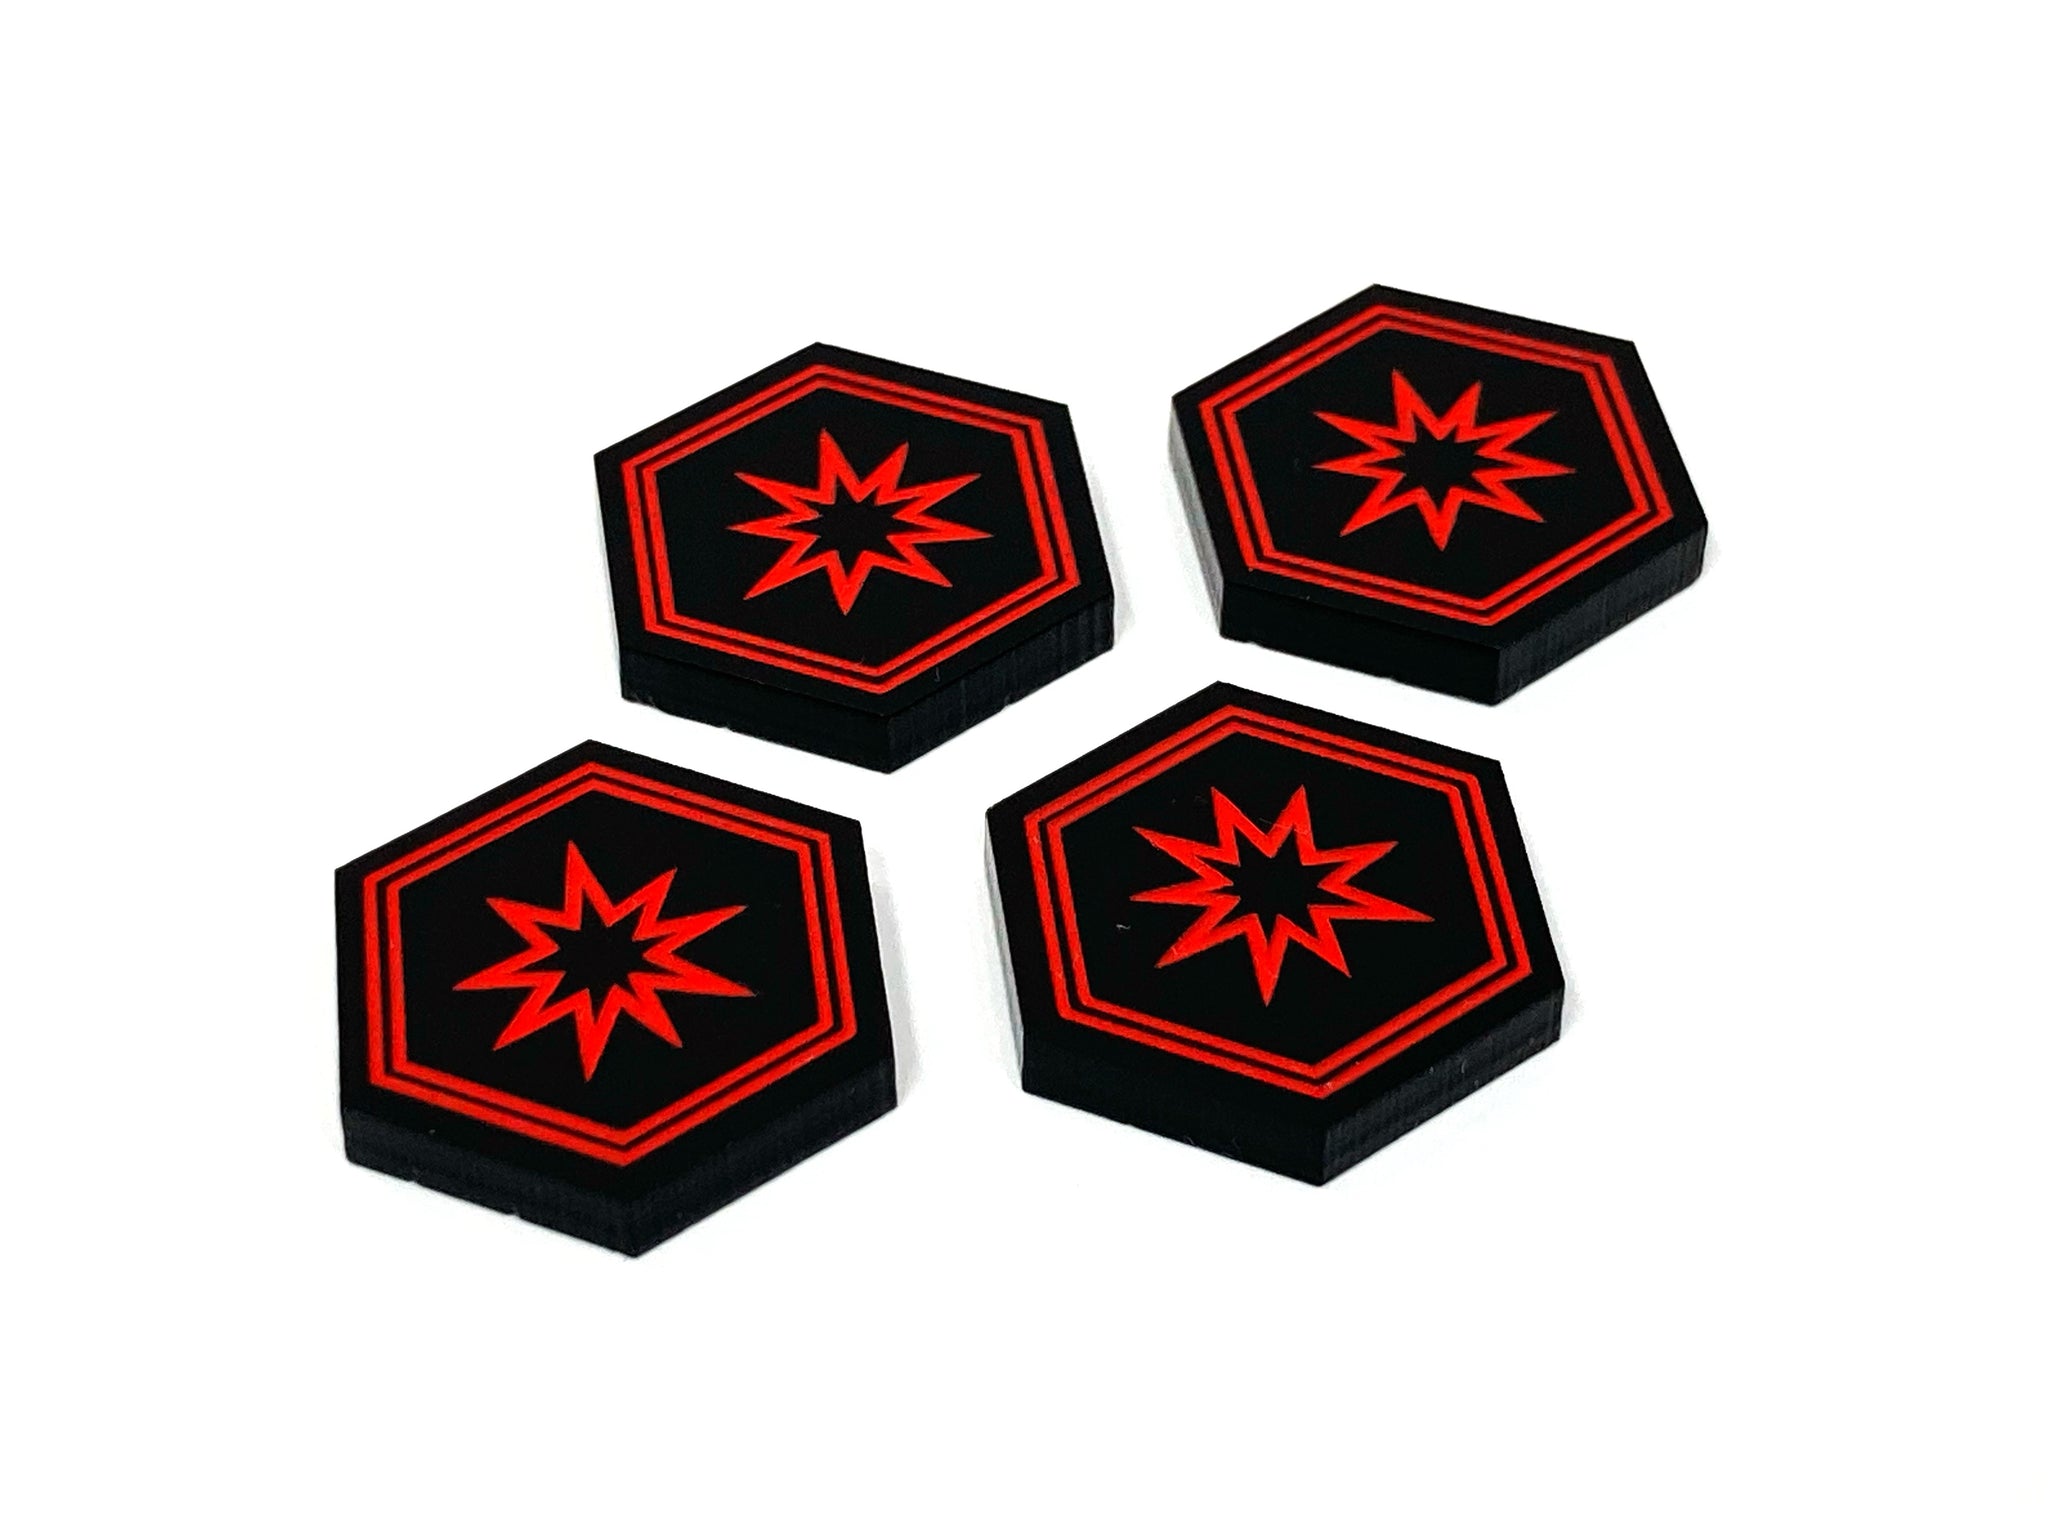 4 x Critical Hit Tokens - Black Series (Single Sided)